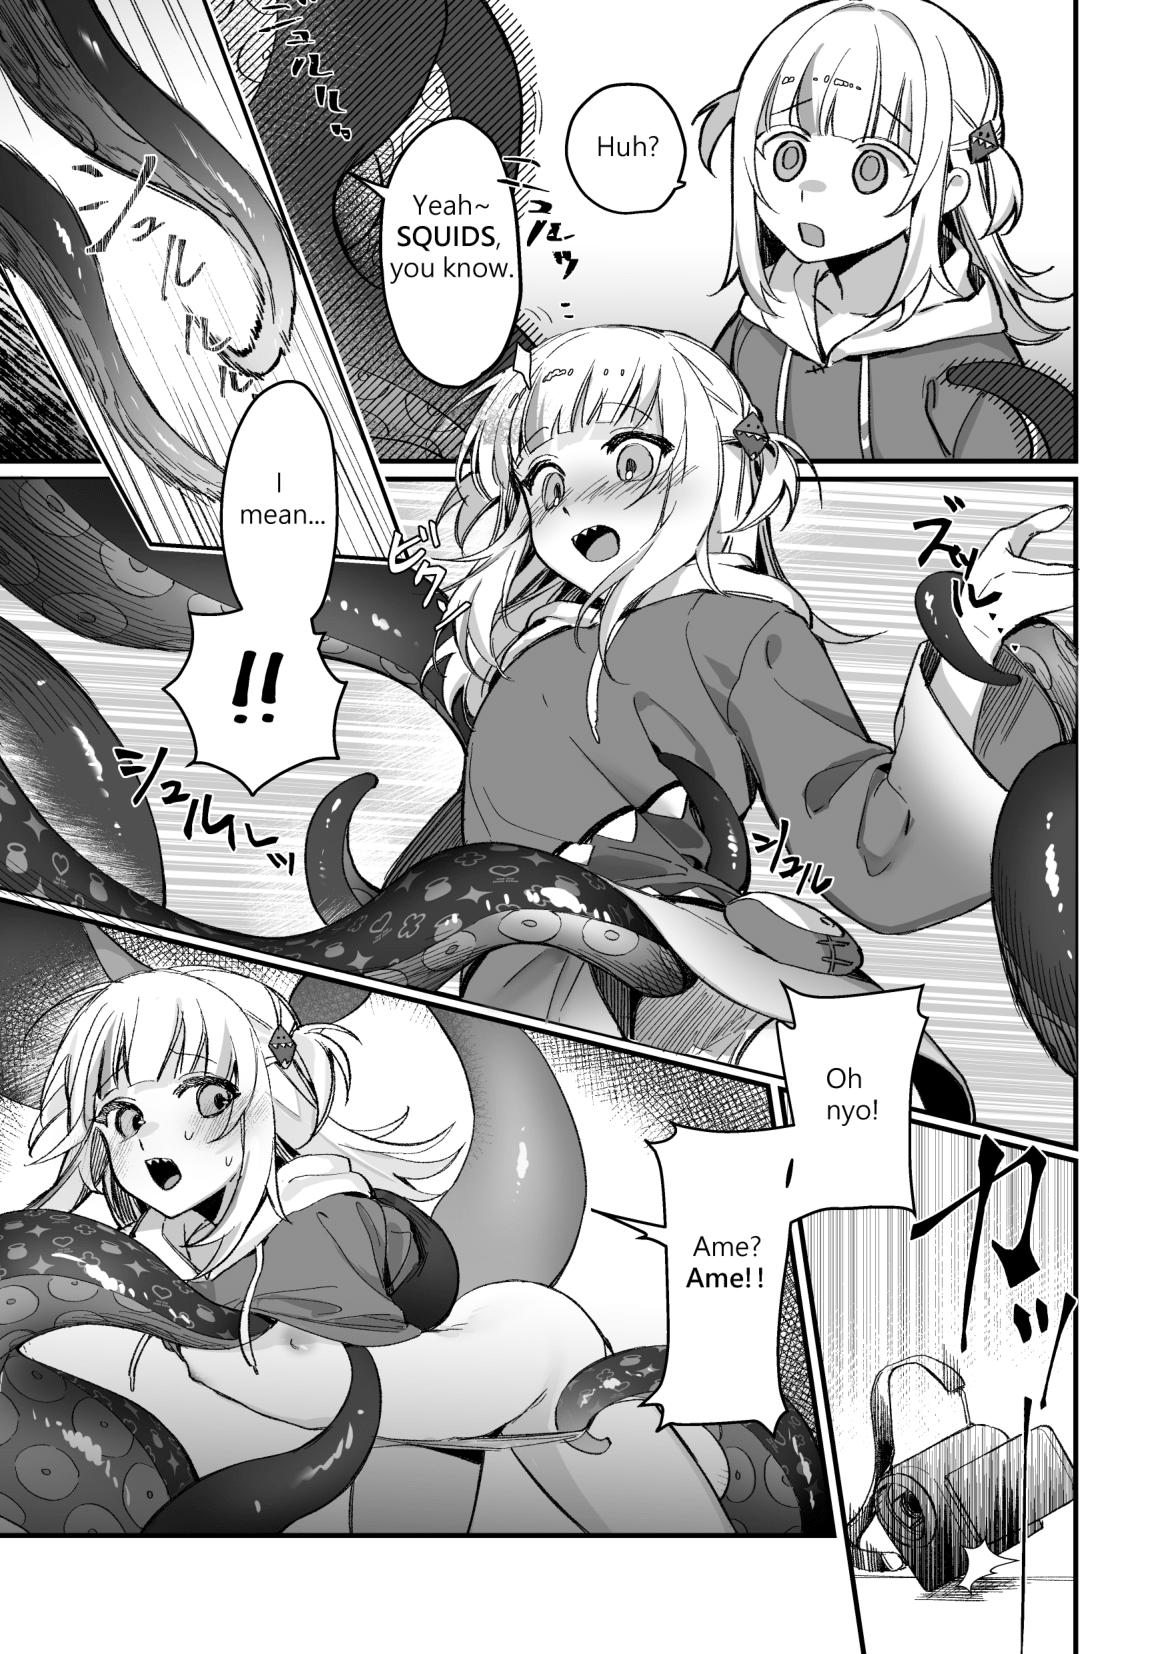 Fucking 【R-18 Comic】Tentacle!! Ina's Boing Boing is out of control!! - Hololive Pain - Page 5